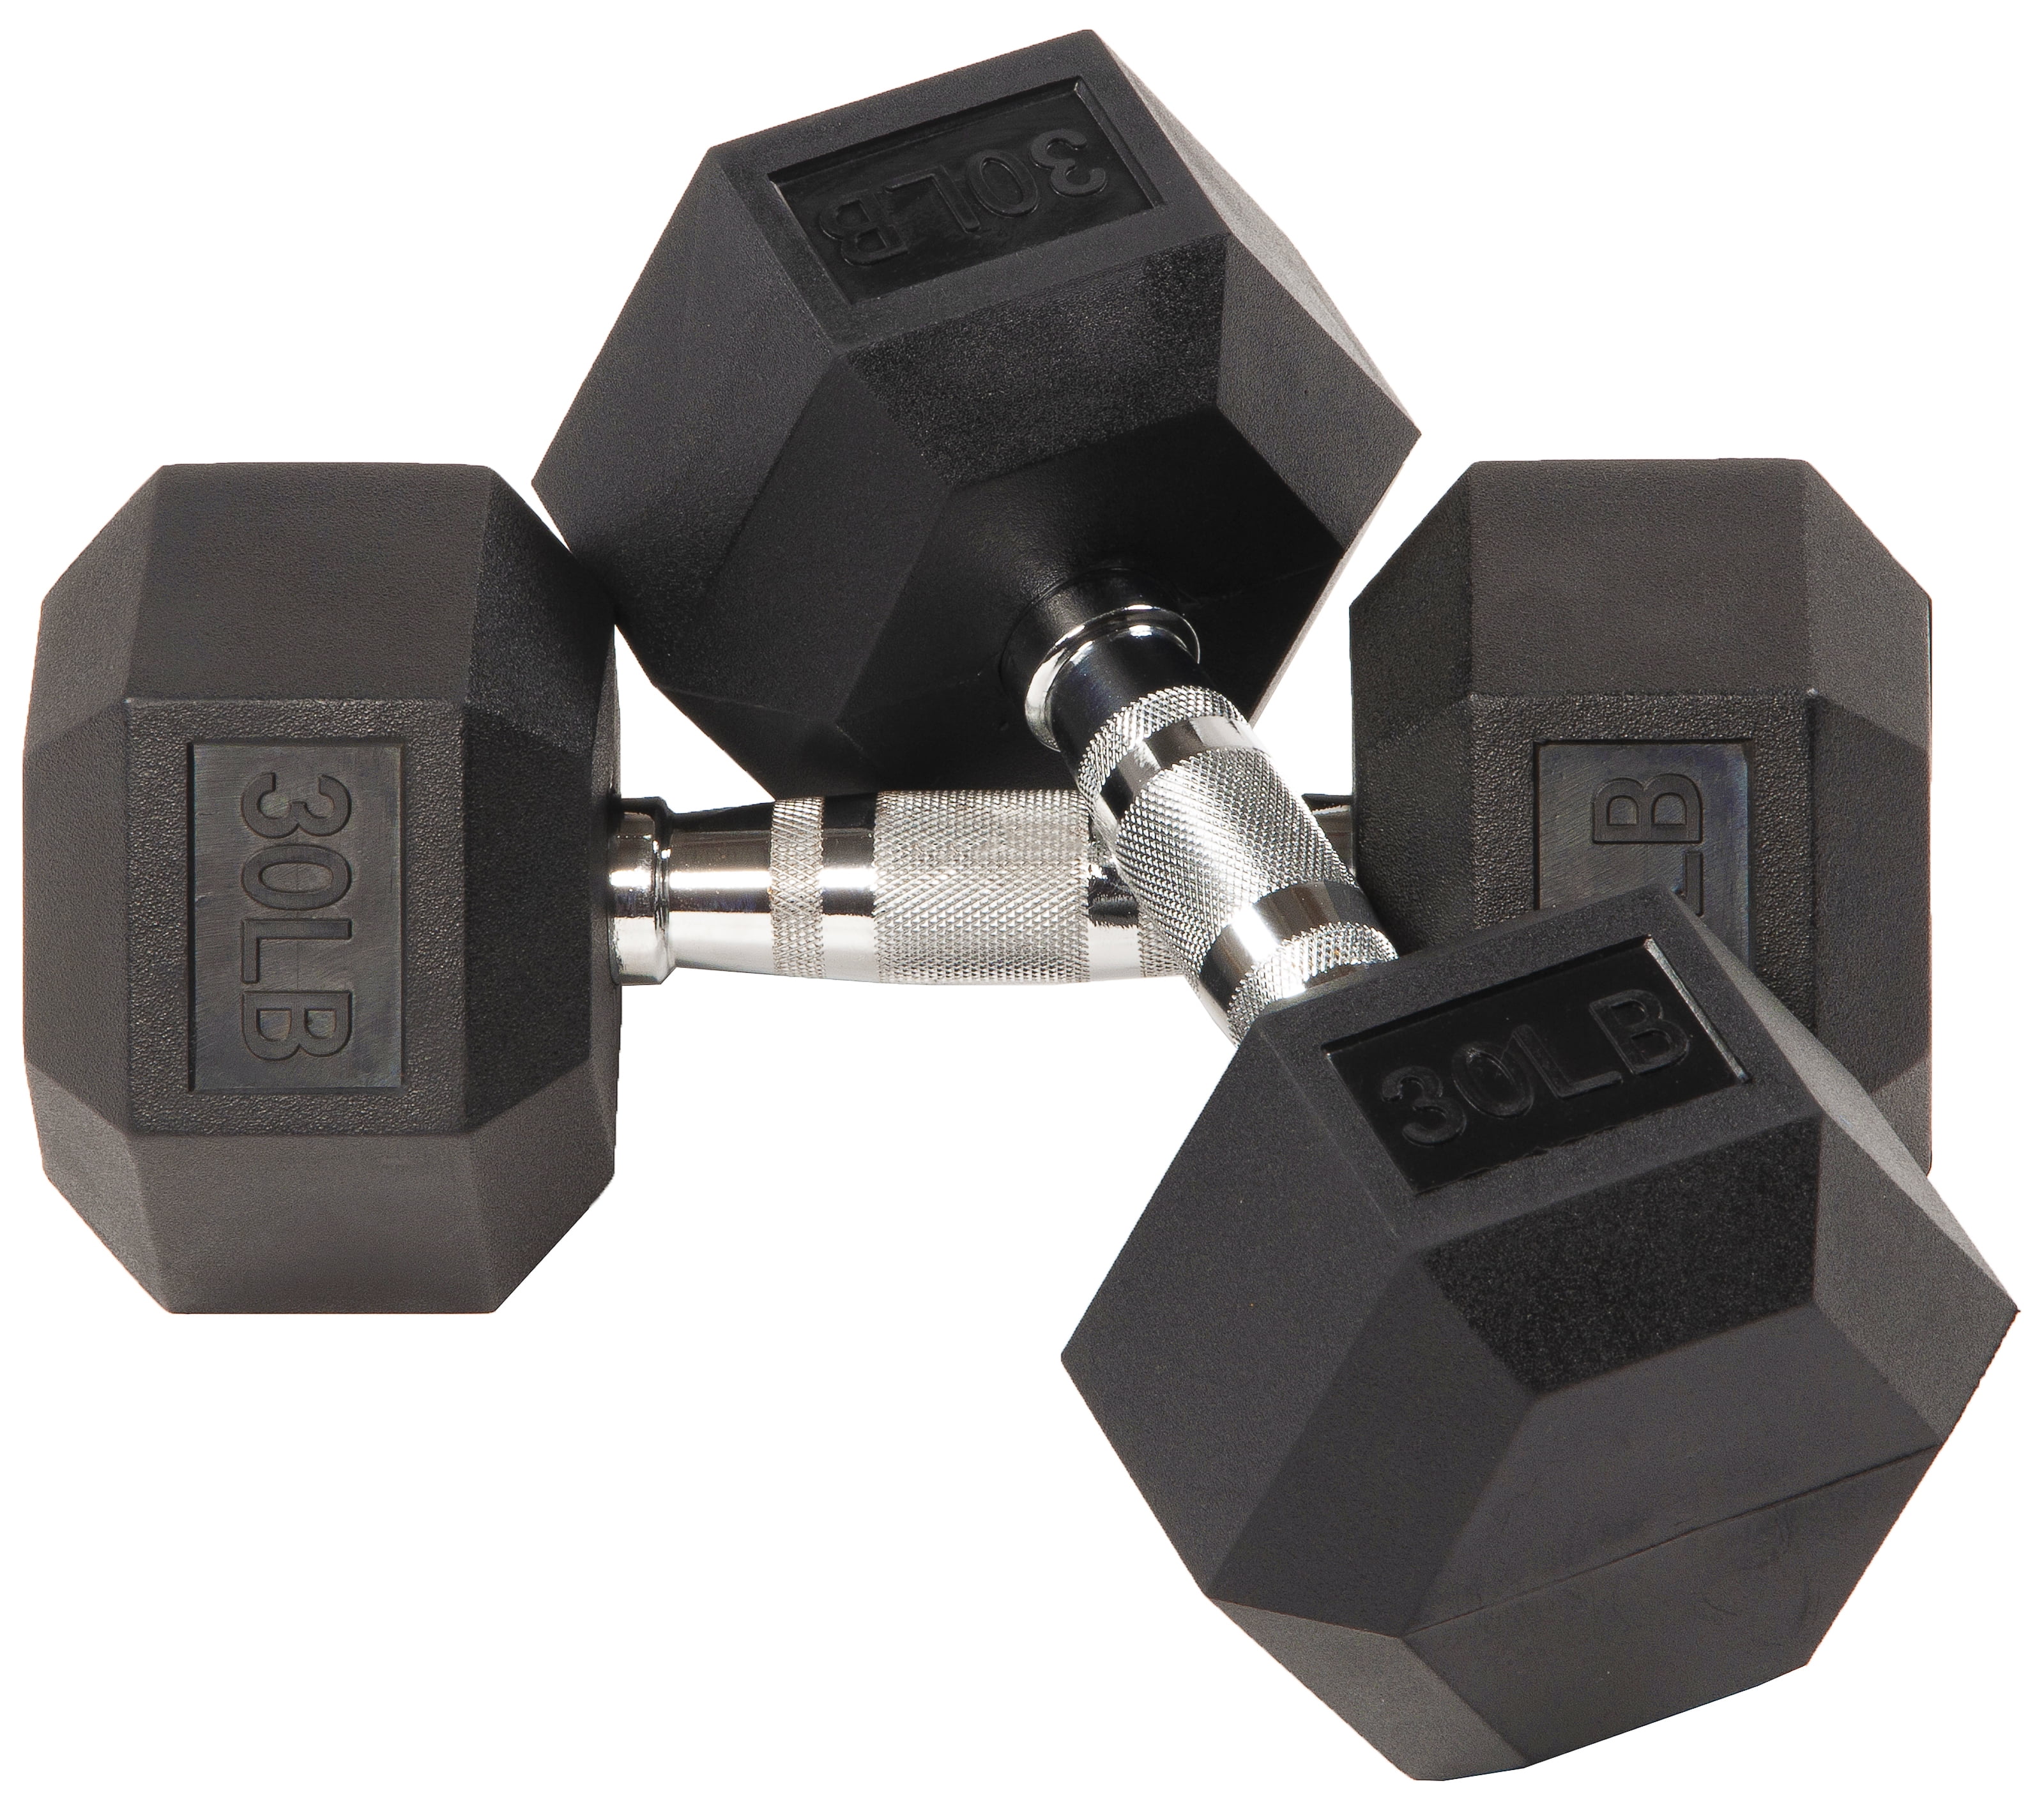 2 CAP 15lb Pound Dumbbells total 30lbs  HEX NEW FAST SHIPPING 